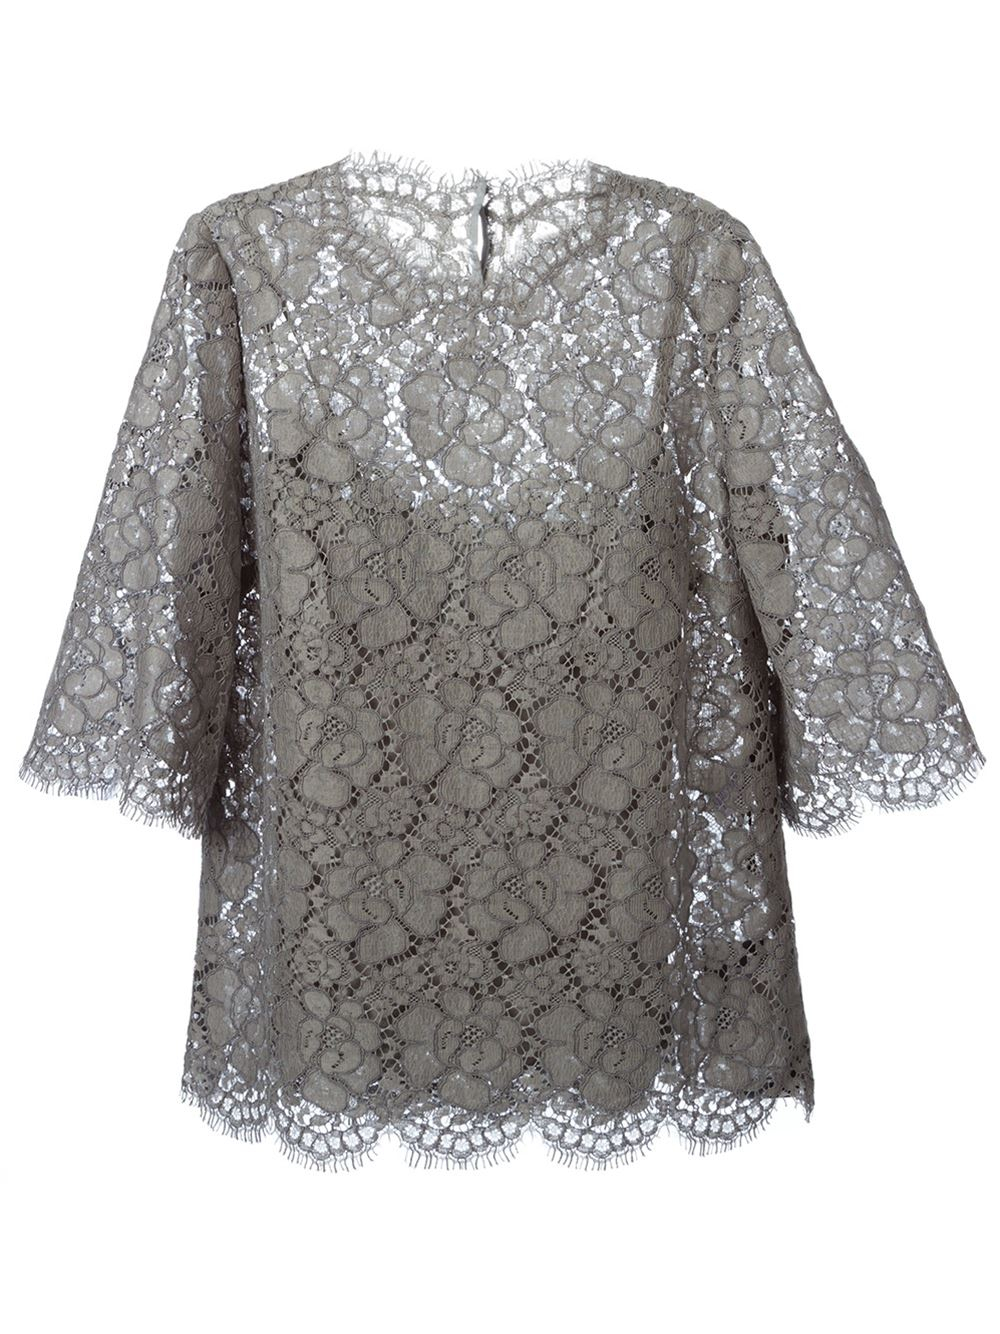 Lyst - Dolce & Gabbana Floral Lace Top in Gray